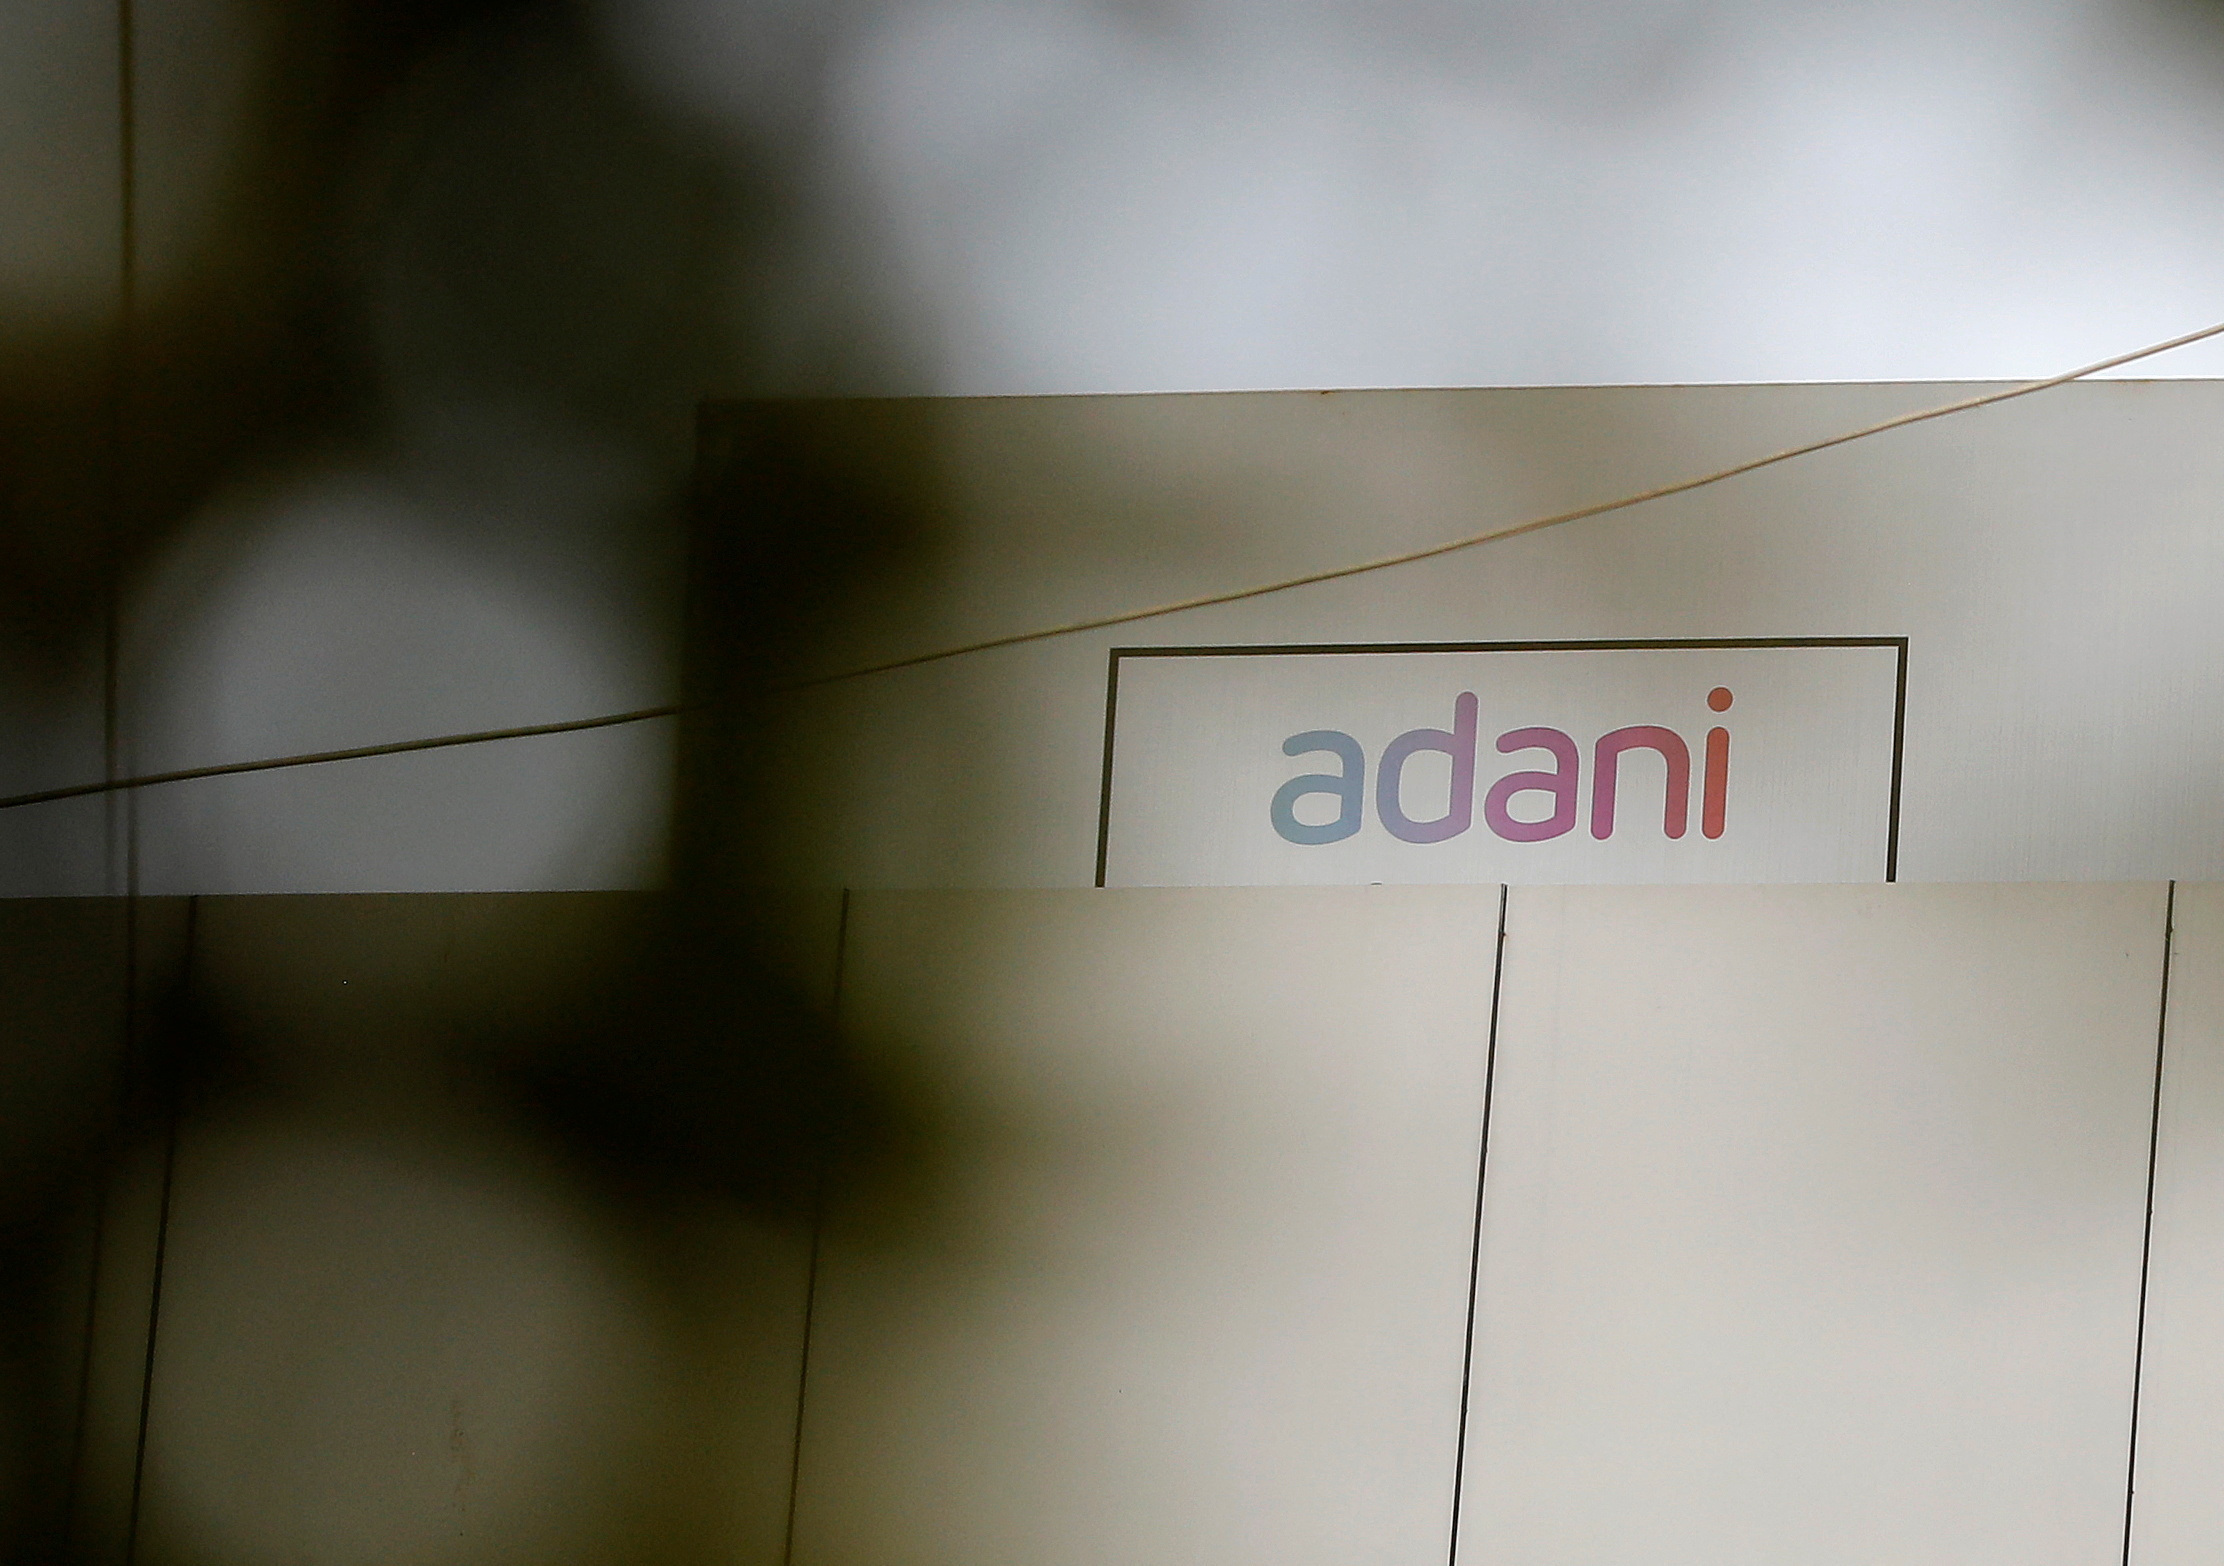 The logo of the Adani Group is seen on one of its buildings in Ahmedabad